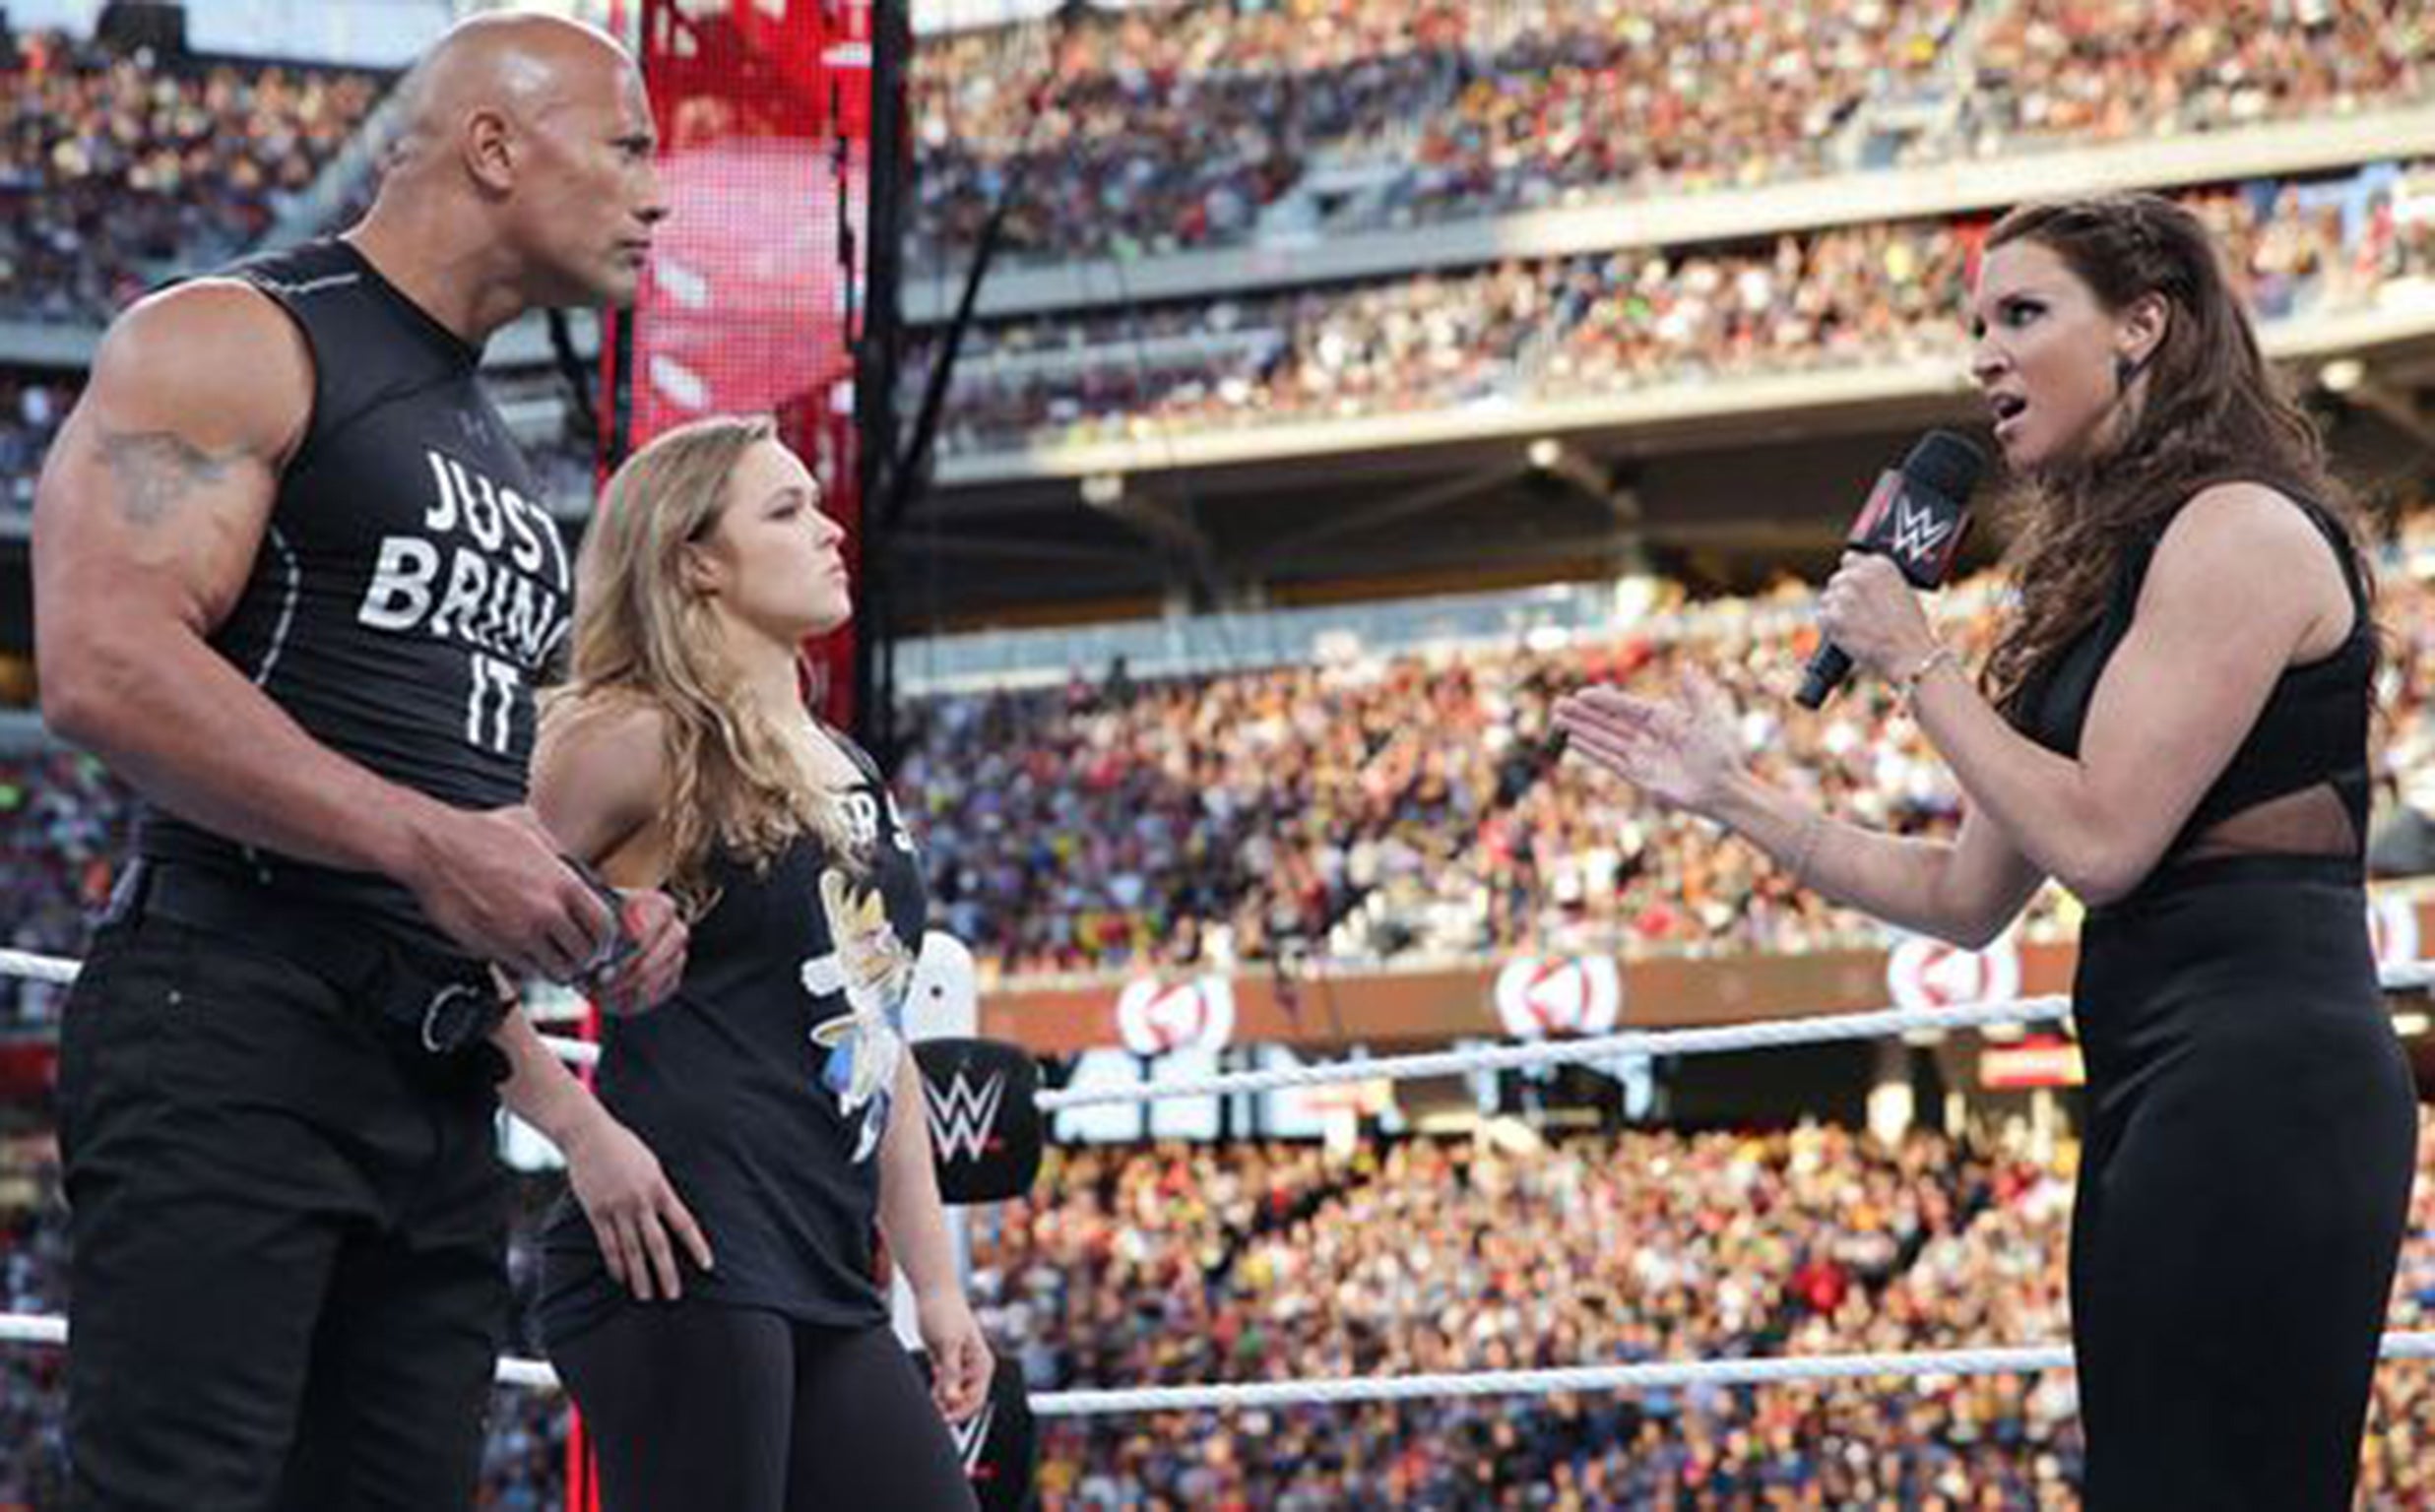 &#13;
Rousey appeared at WrestleMania in 2015 (WWE)&#13;